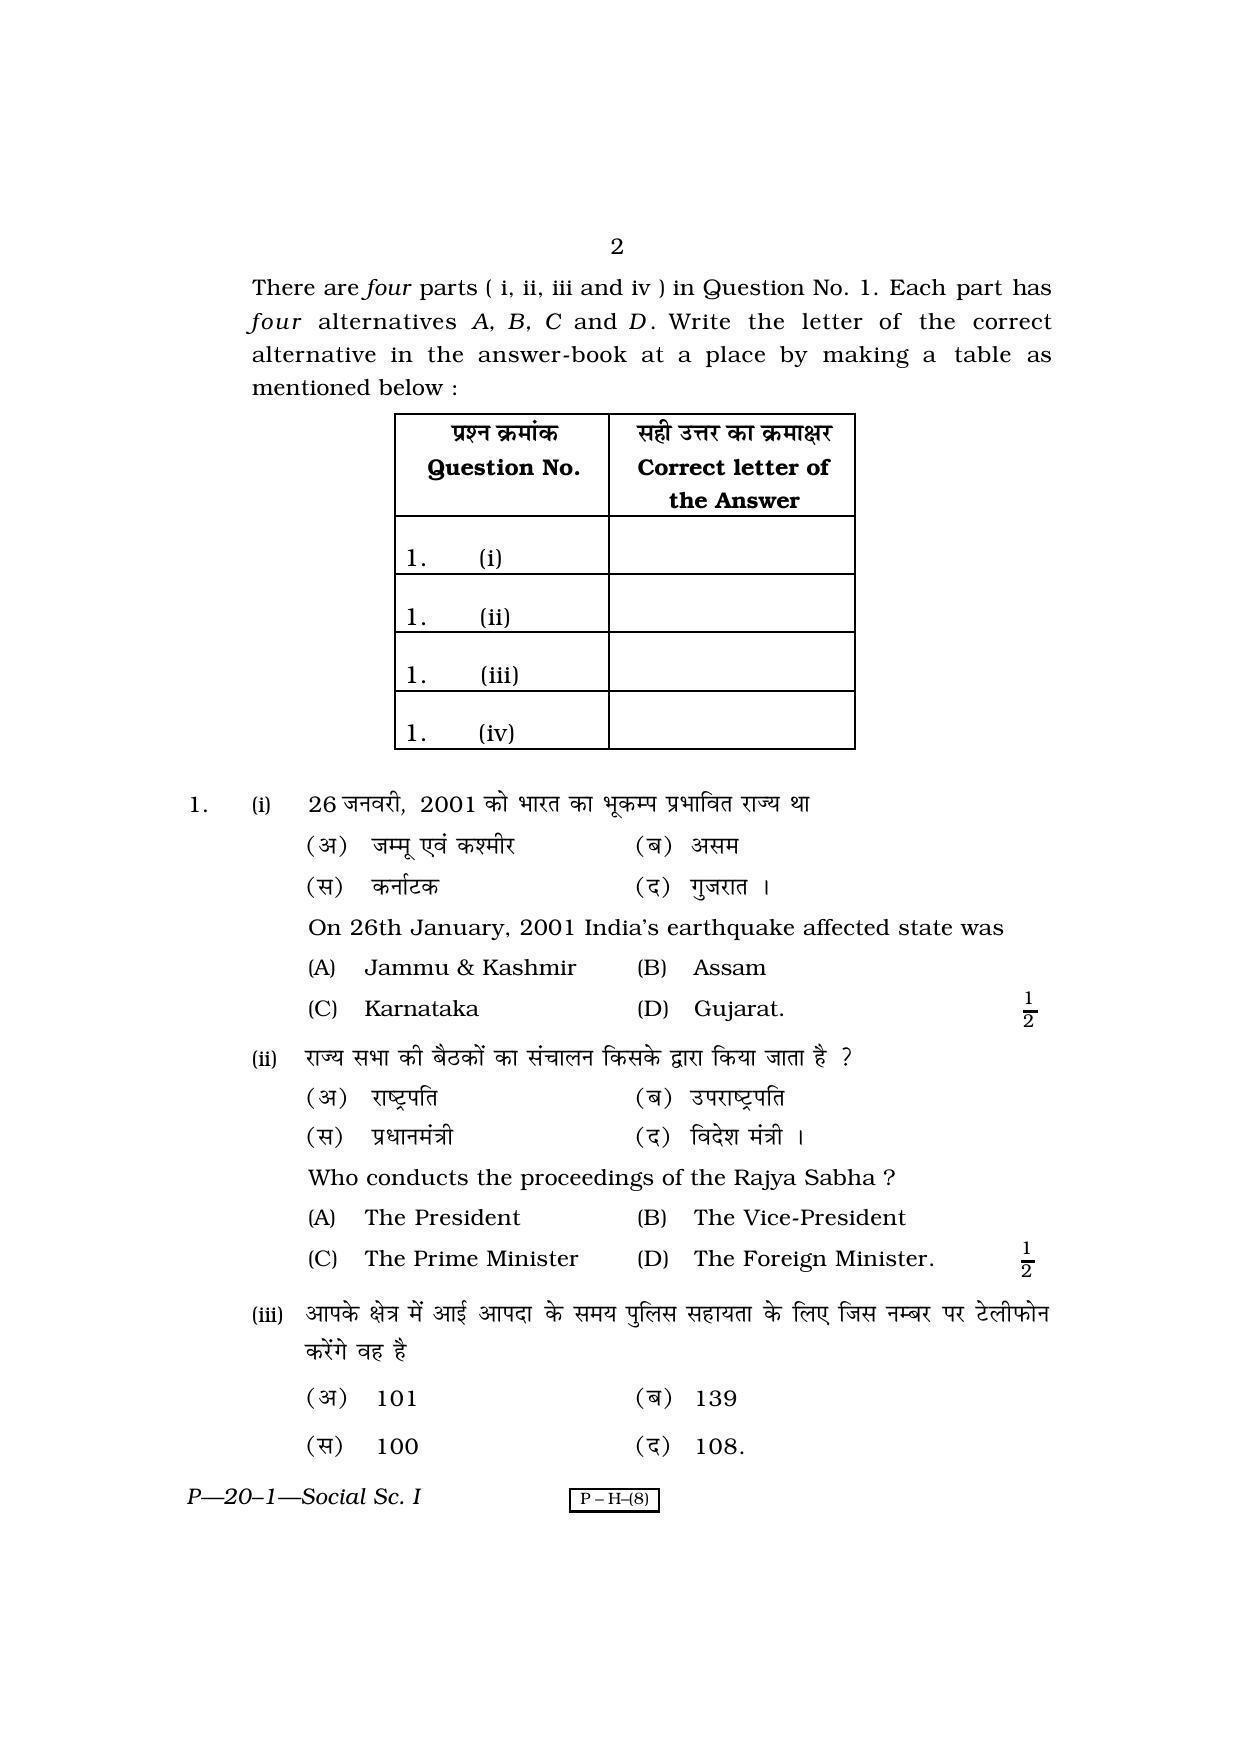 RBSE 2010 Social Science I Praveshika Question Paper - Page 2